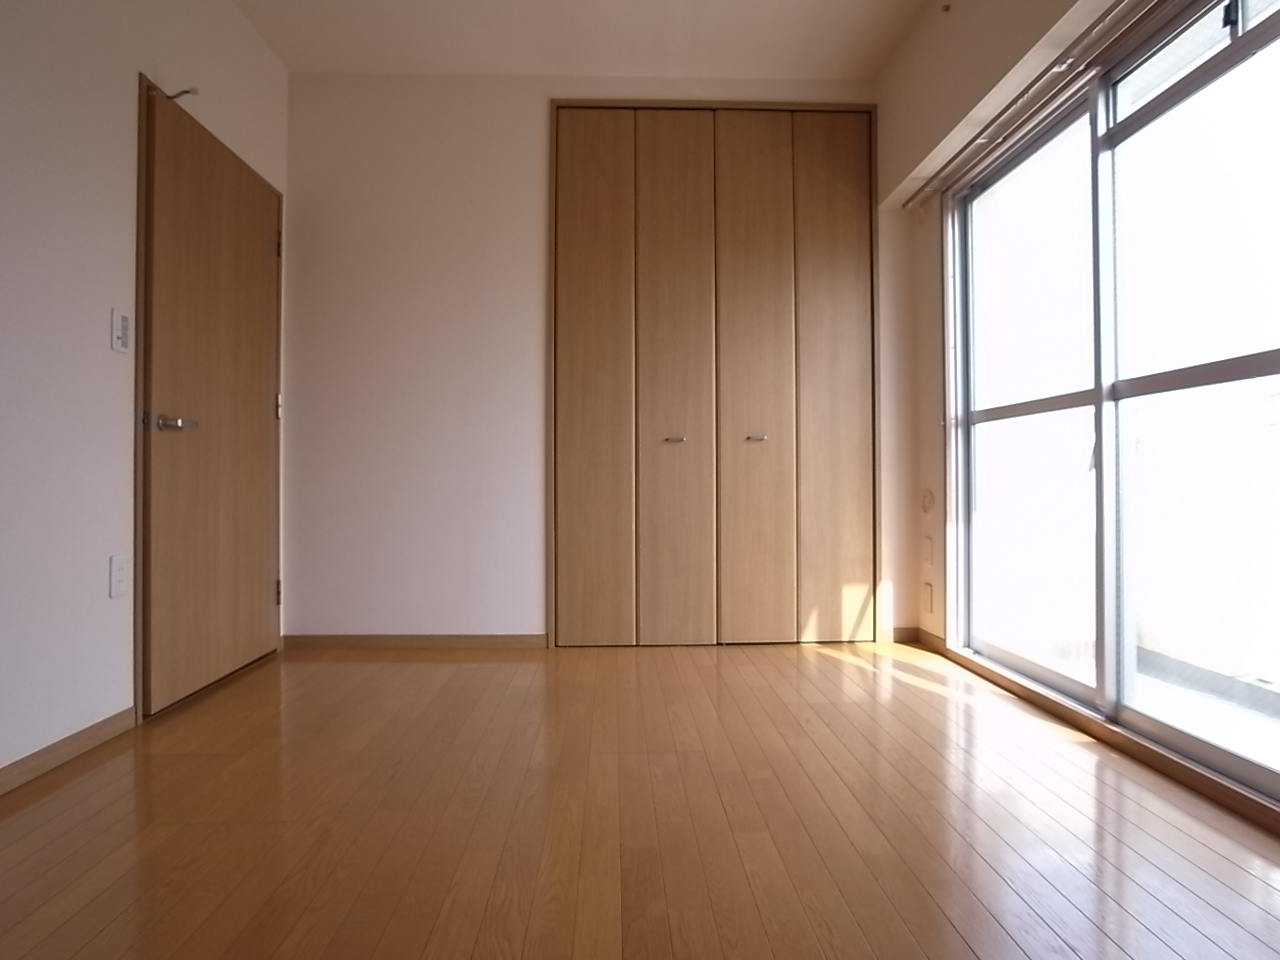 Living and room. There is a large storage compartment 6.4 tatami Western-style